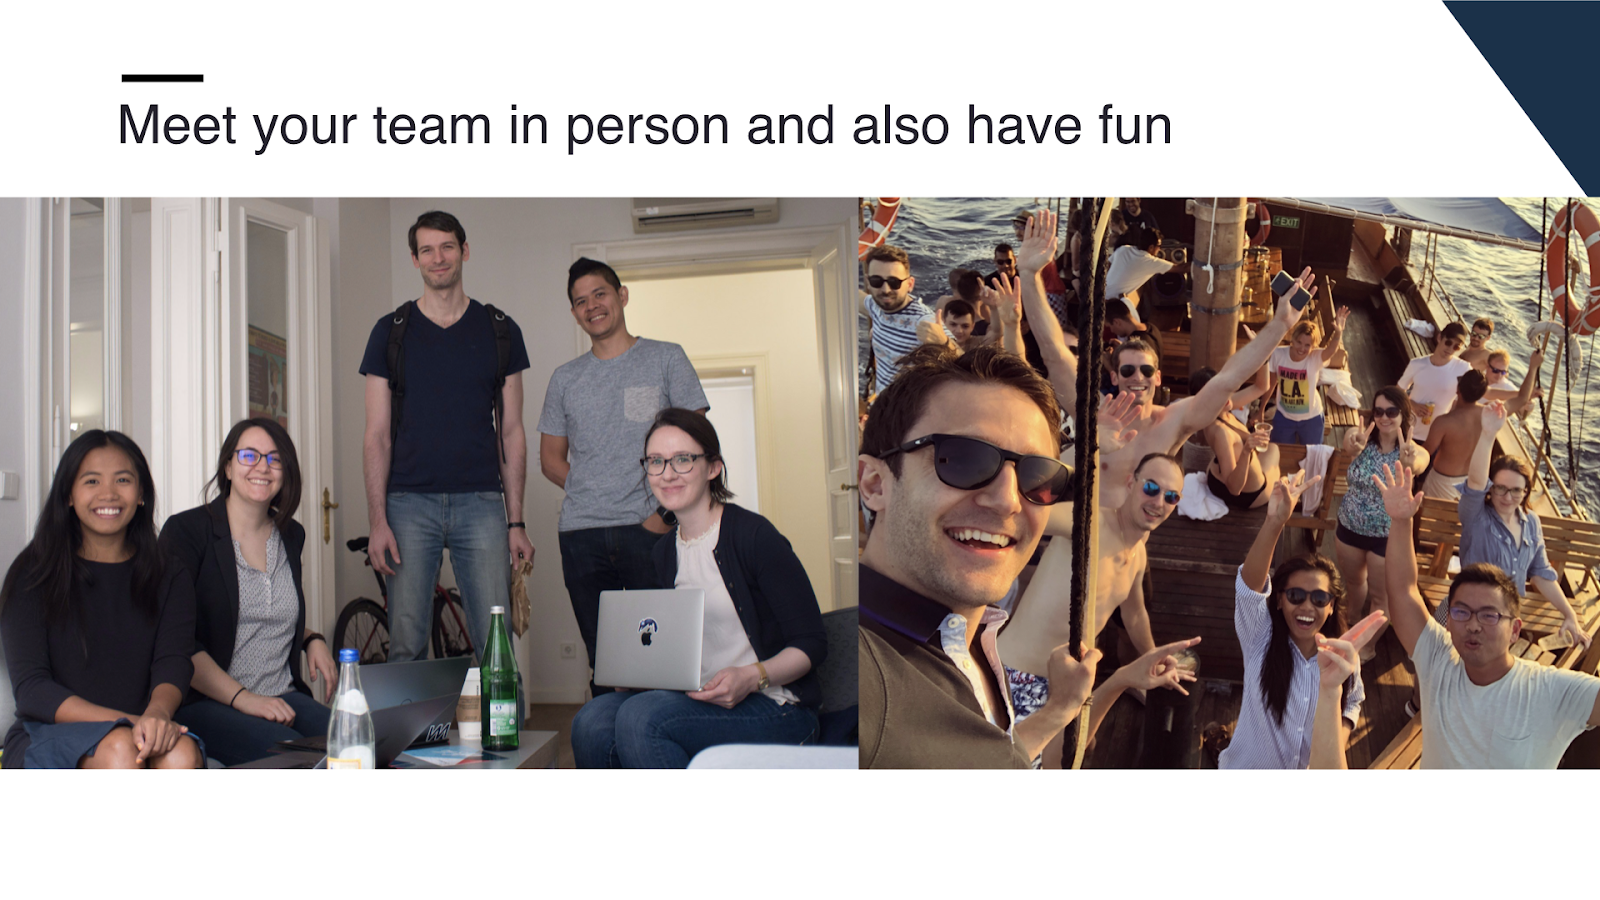 Meet your team in person and have fun